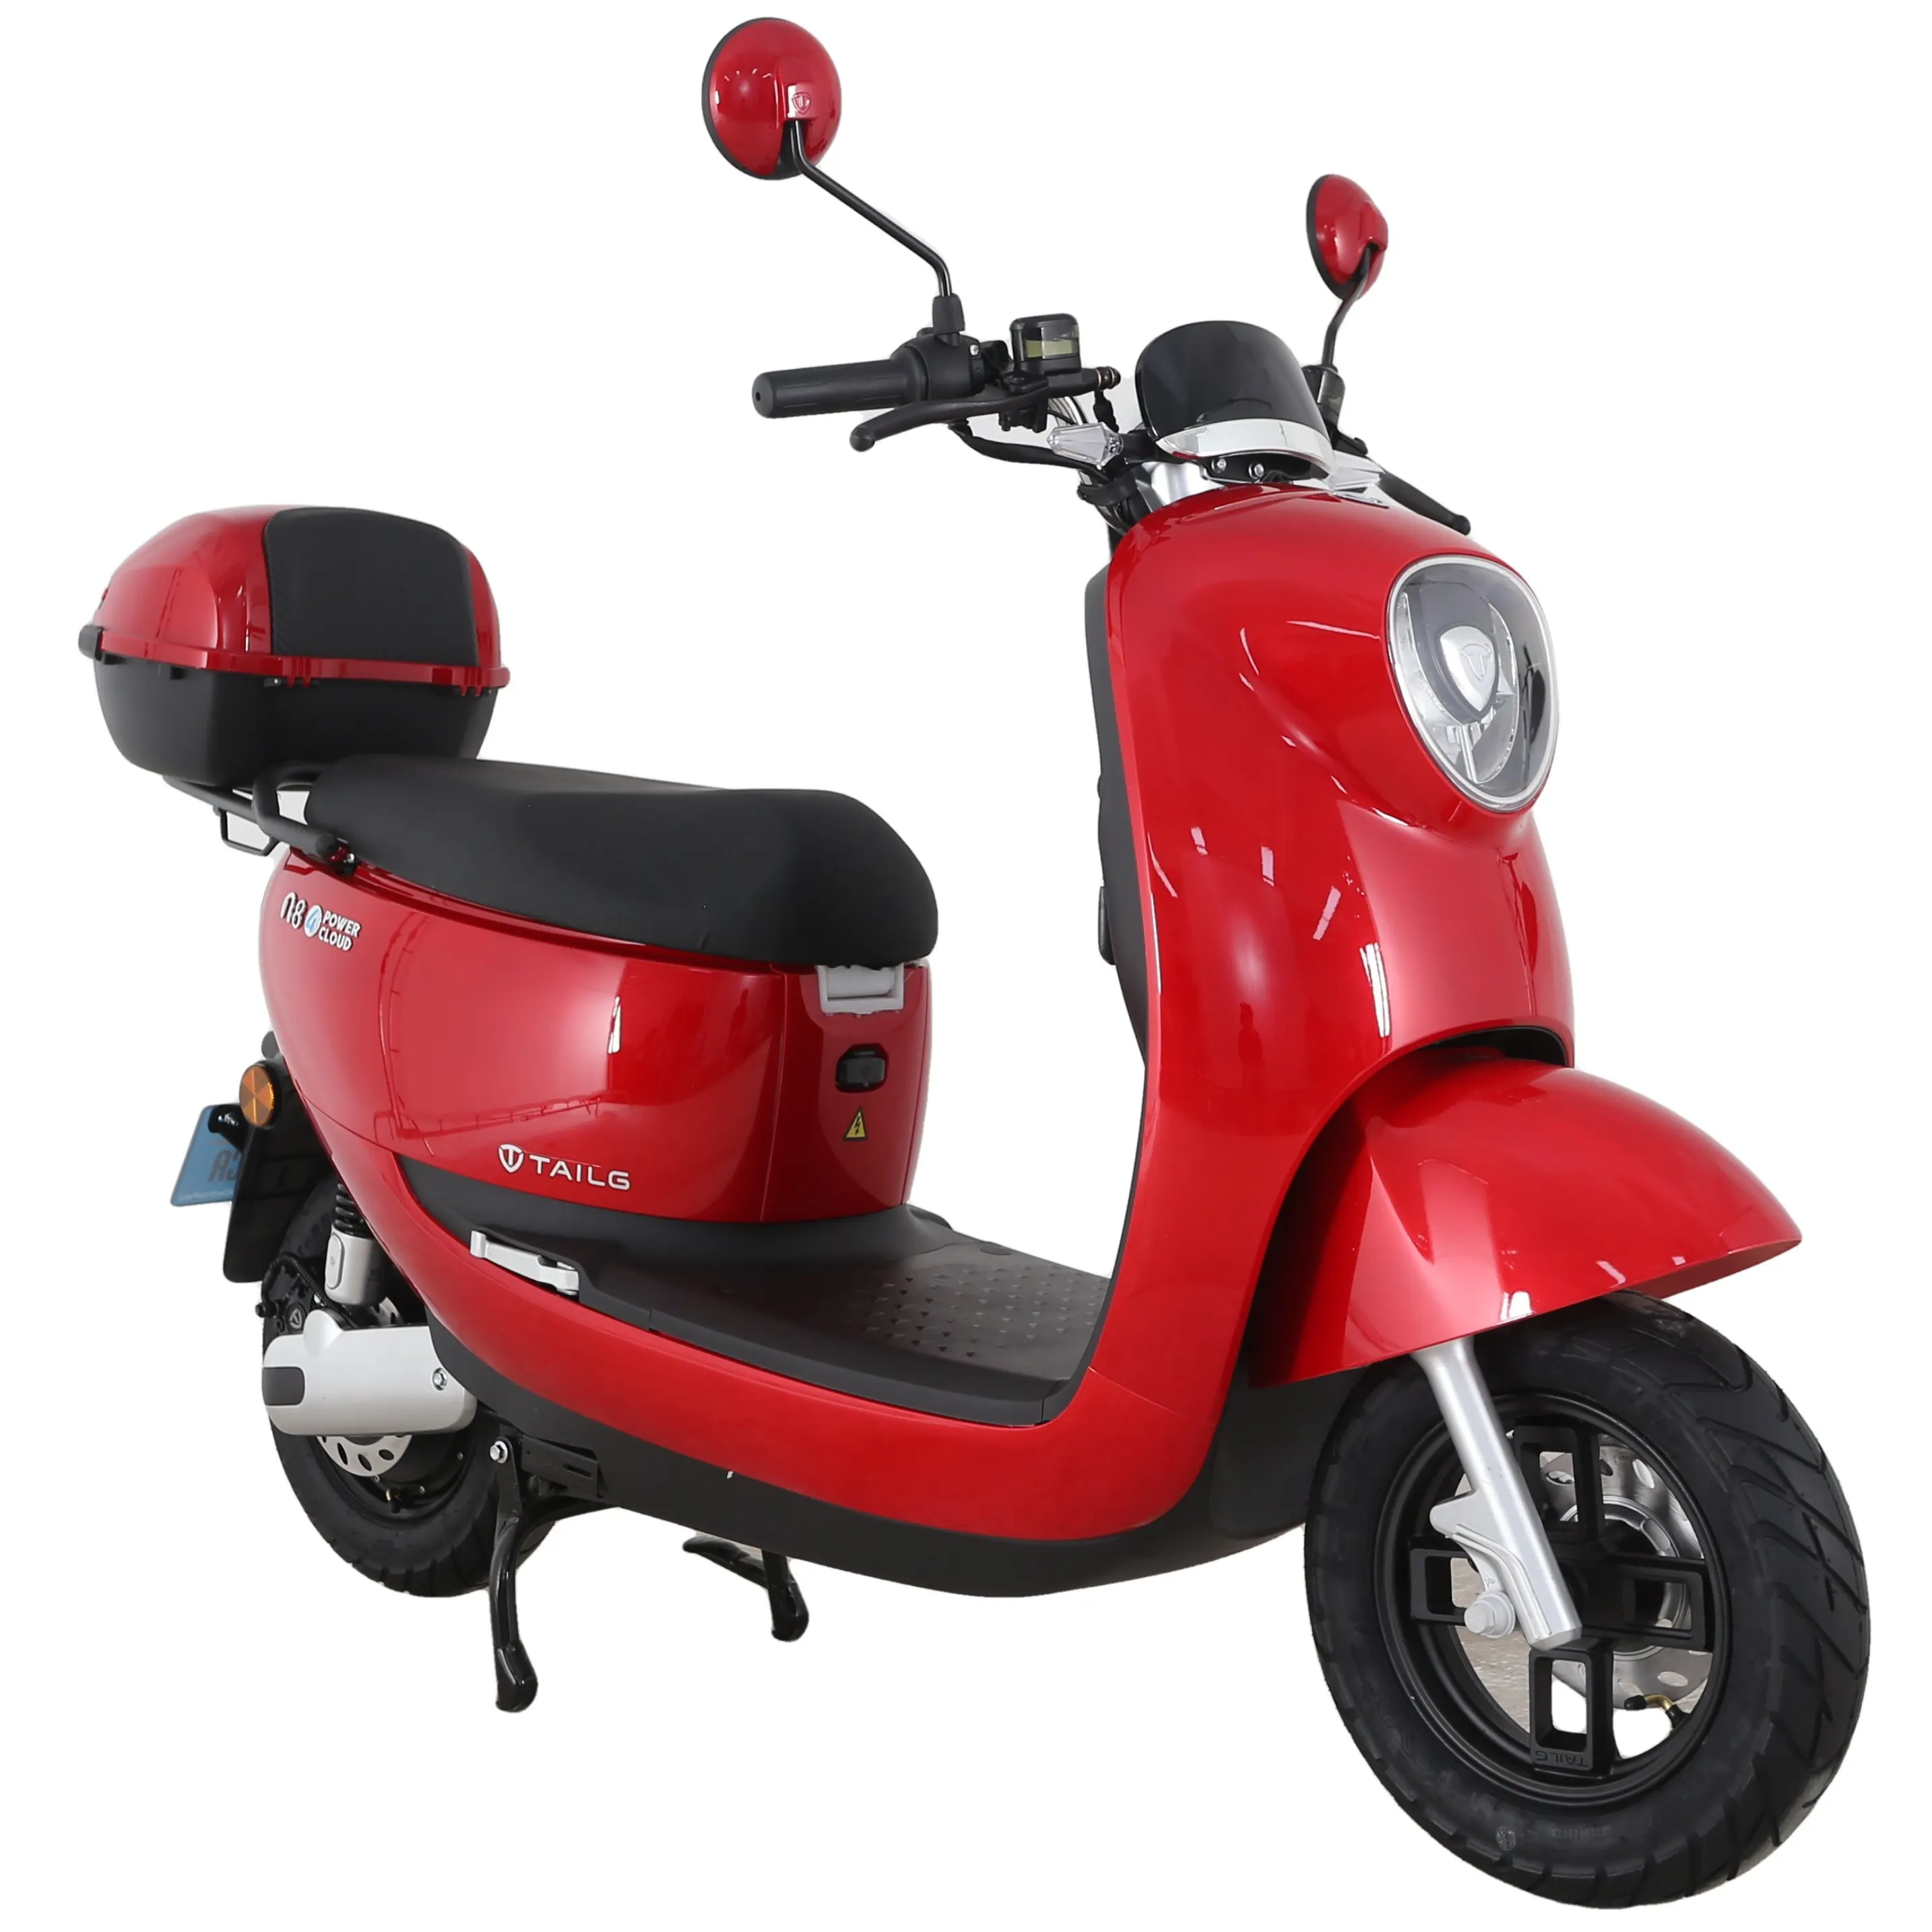 Tailg Wholesale For Sale Colorful Red 2000W Long Range 160Km 250CC Engine Sport Racing EEC E Moped Chopper Electric Motorcycle